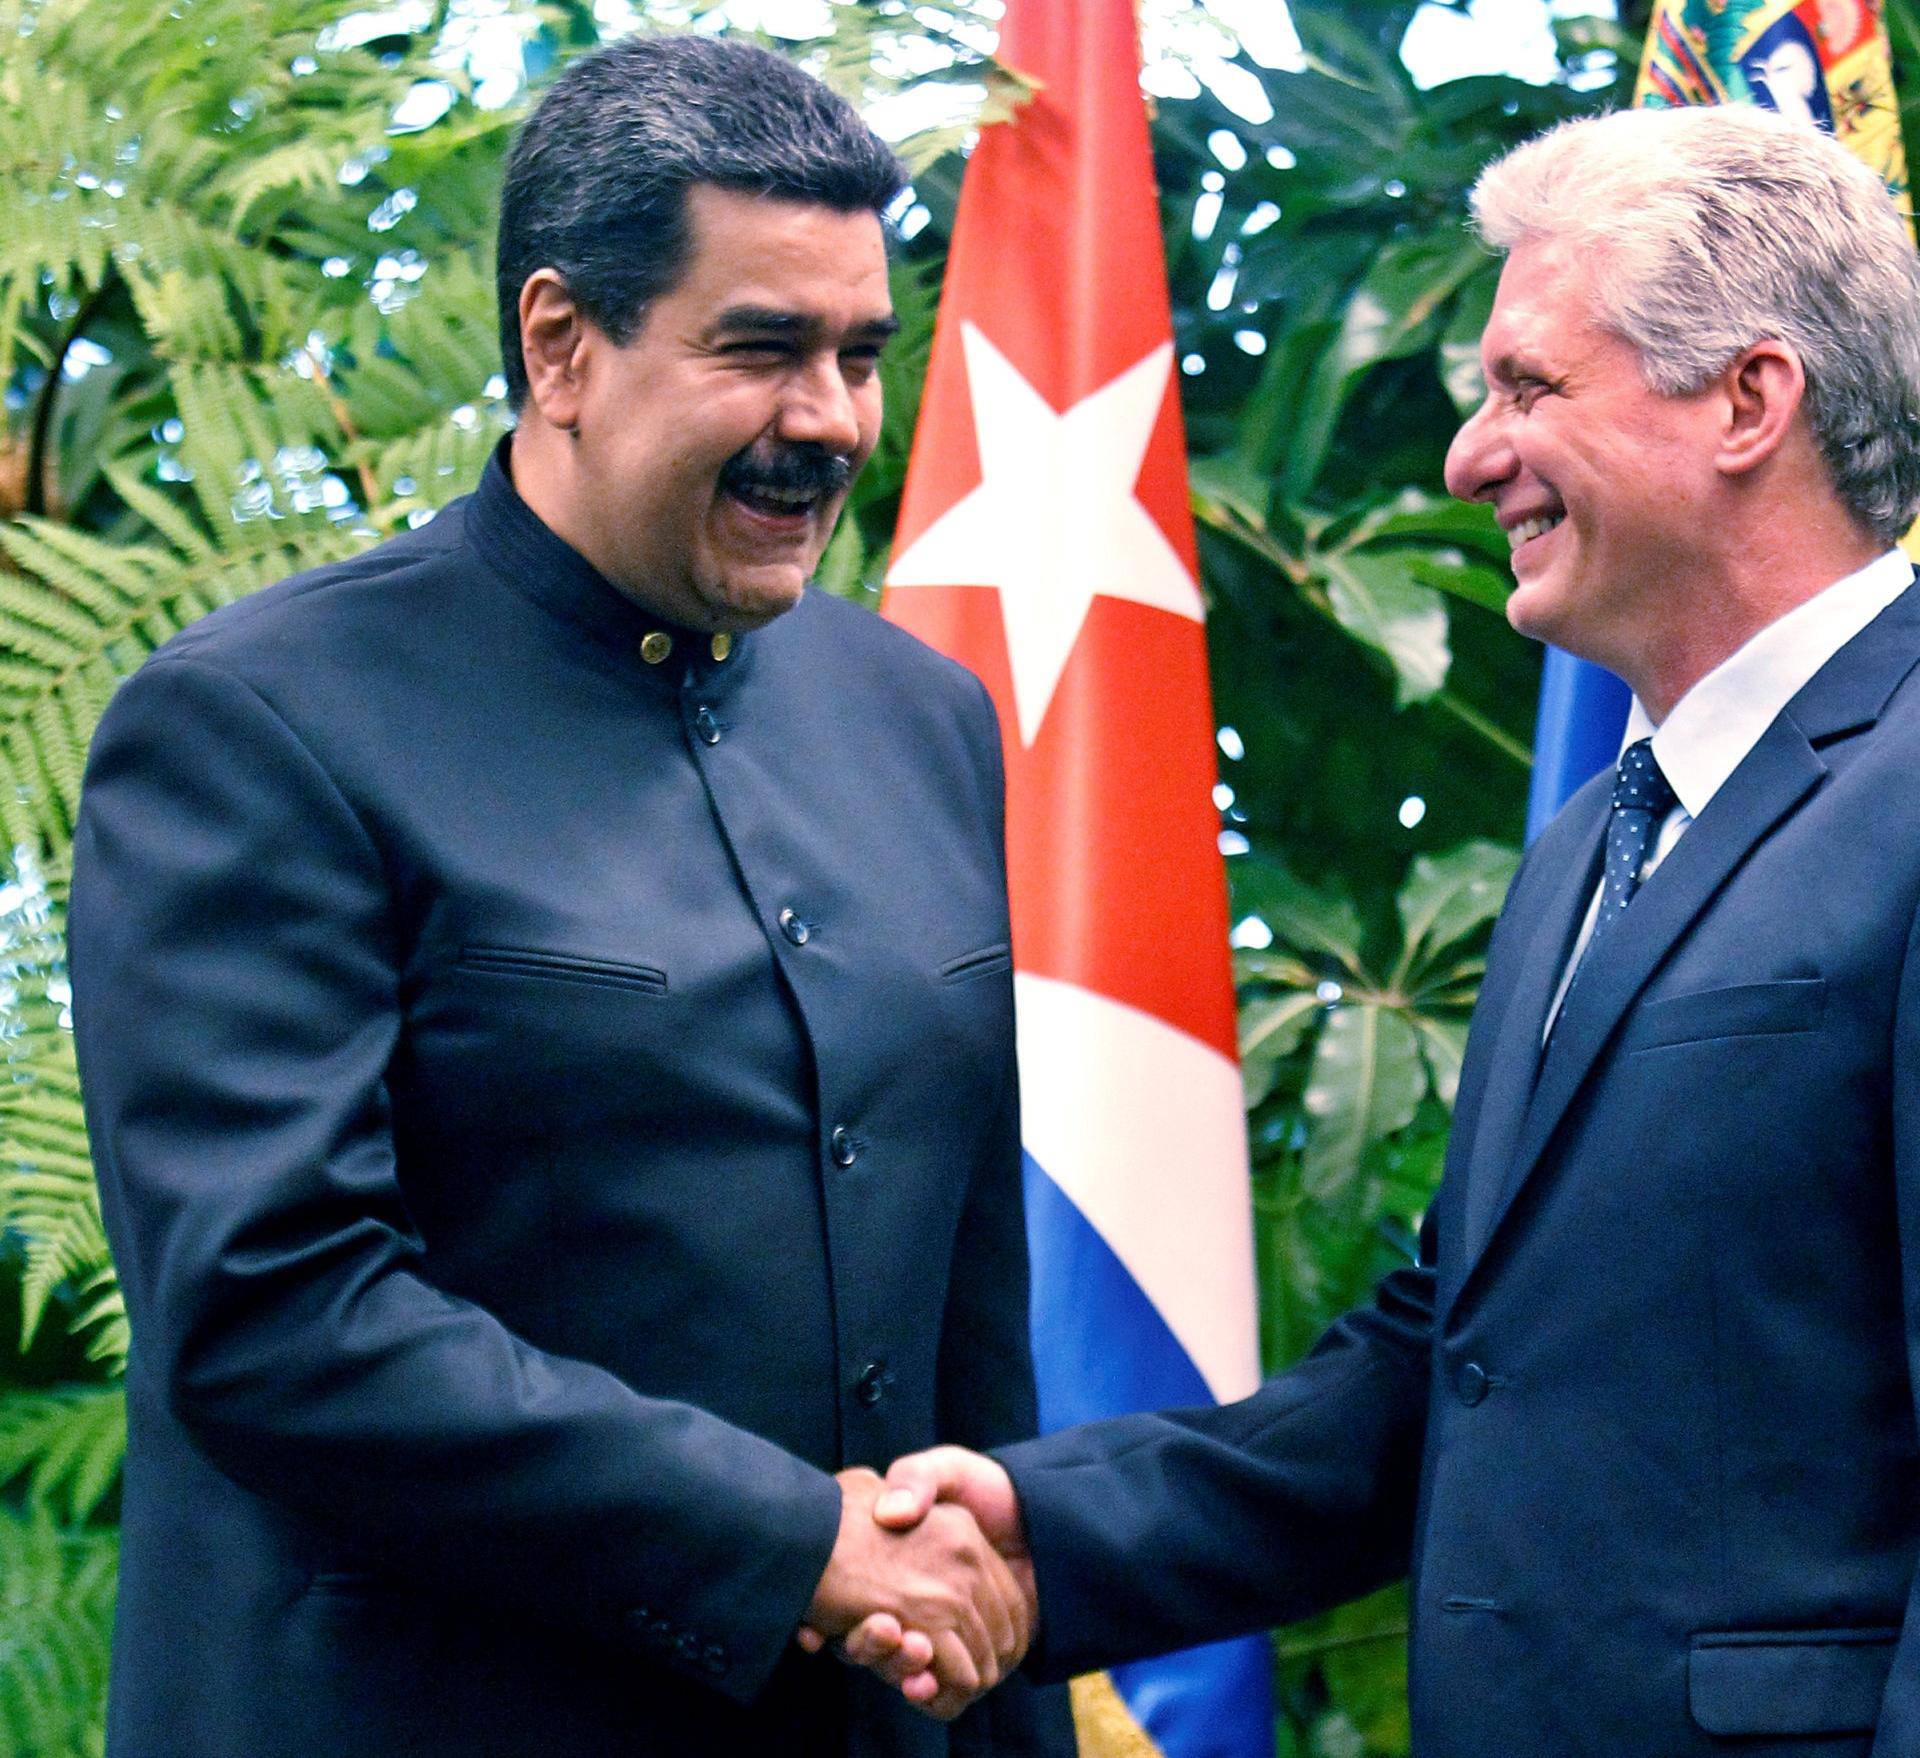 Cuban President Miguel Diaz-Canel shakes hands with Venezuela's President Nicolas Maduro at the Revolution Palace in Havana